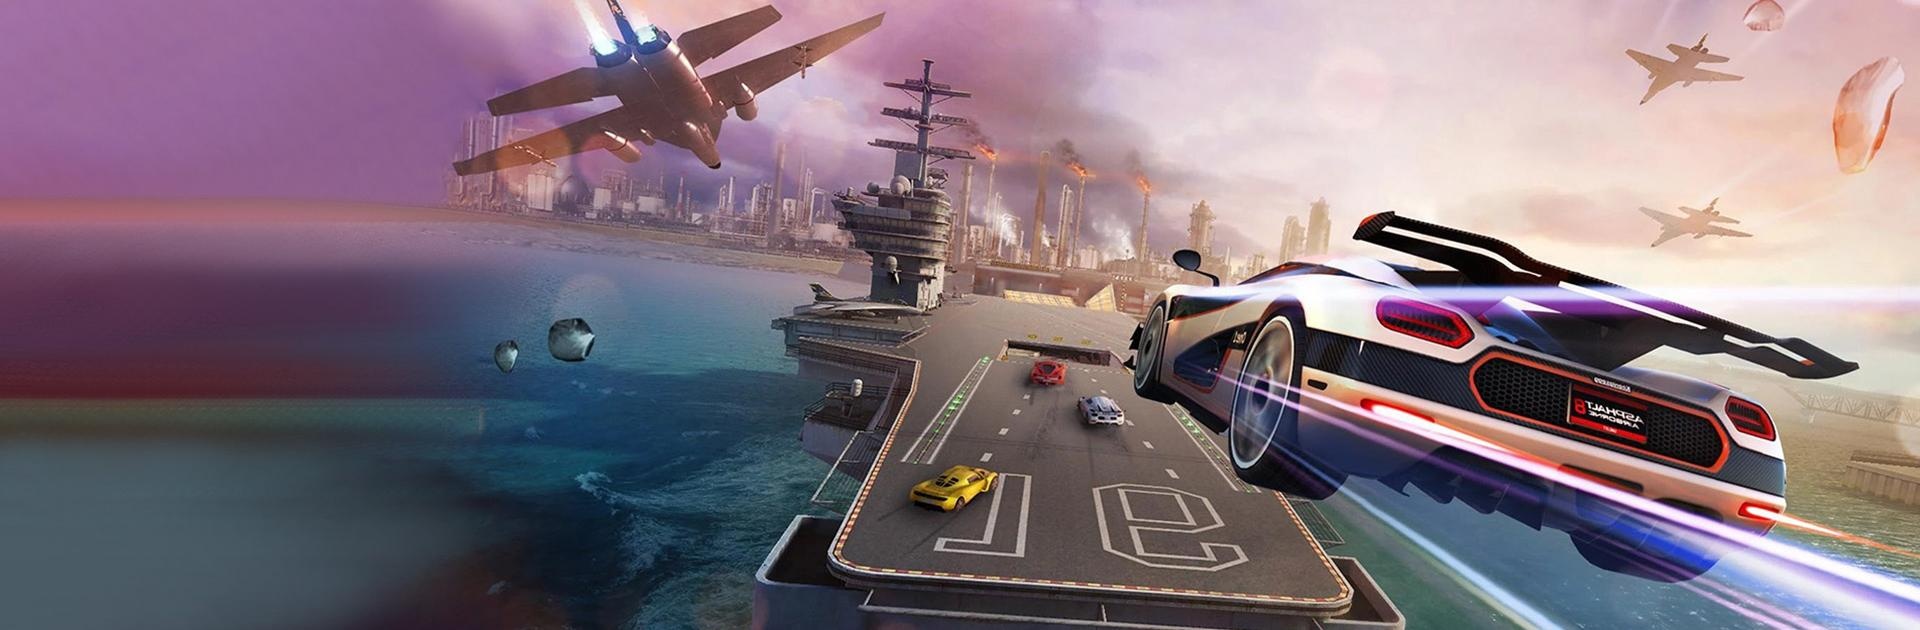 Play Asphalt 8 - Car Racing Game Online for Free on PC & Mobile